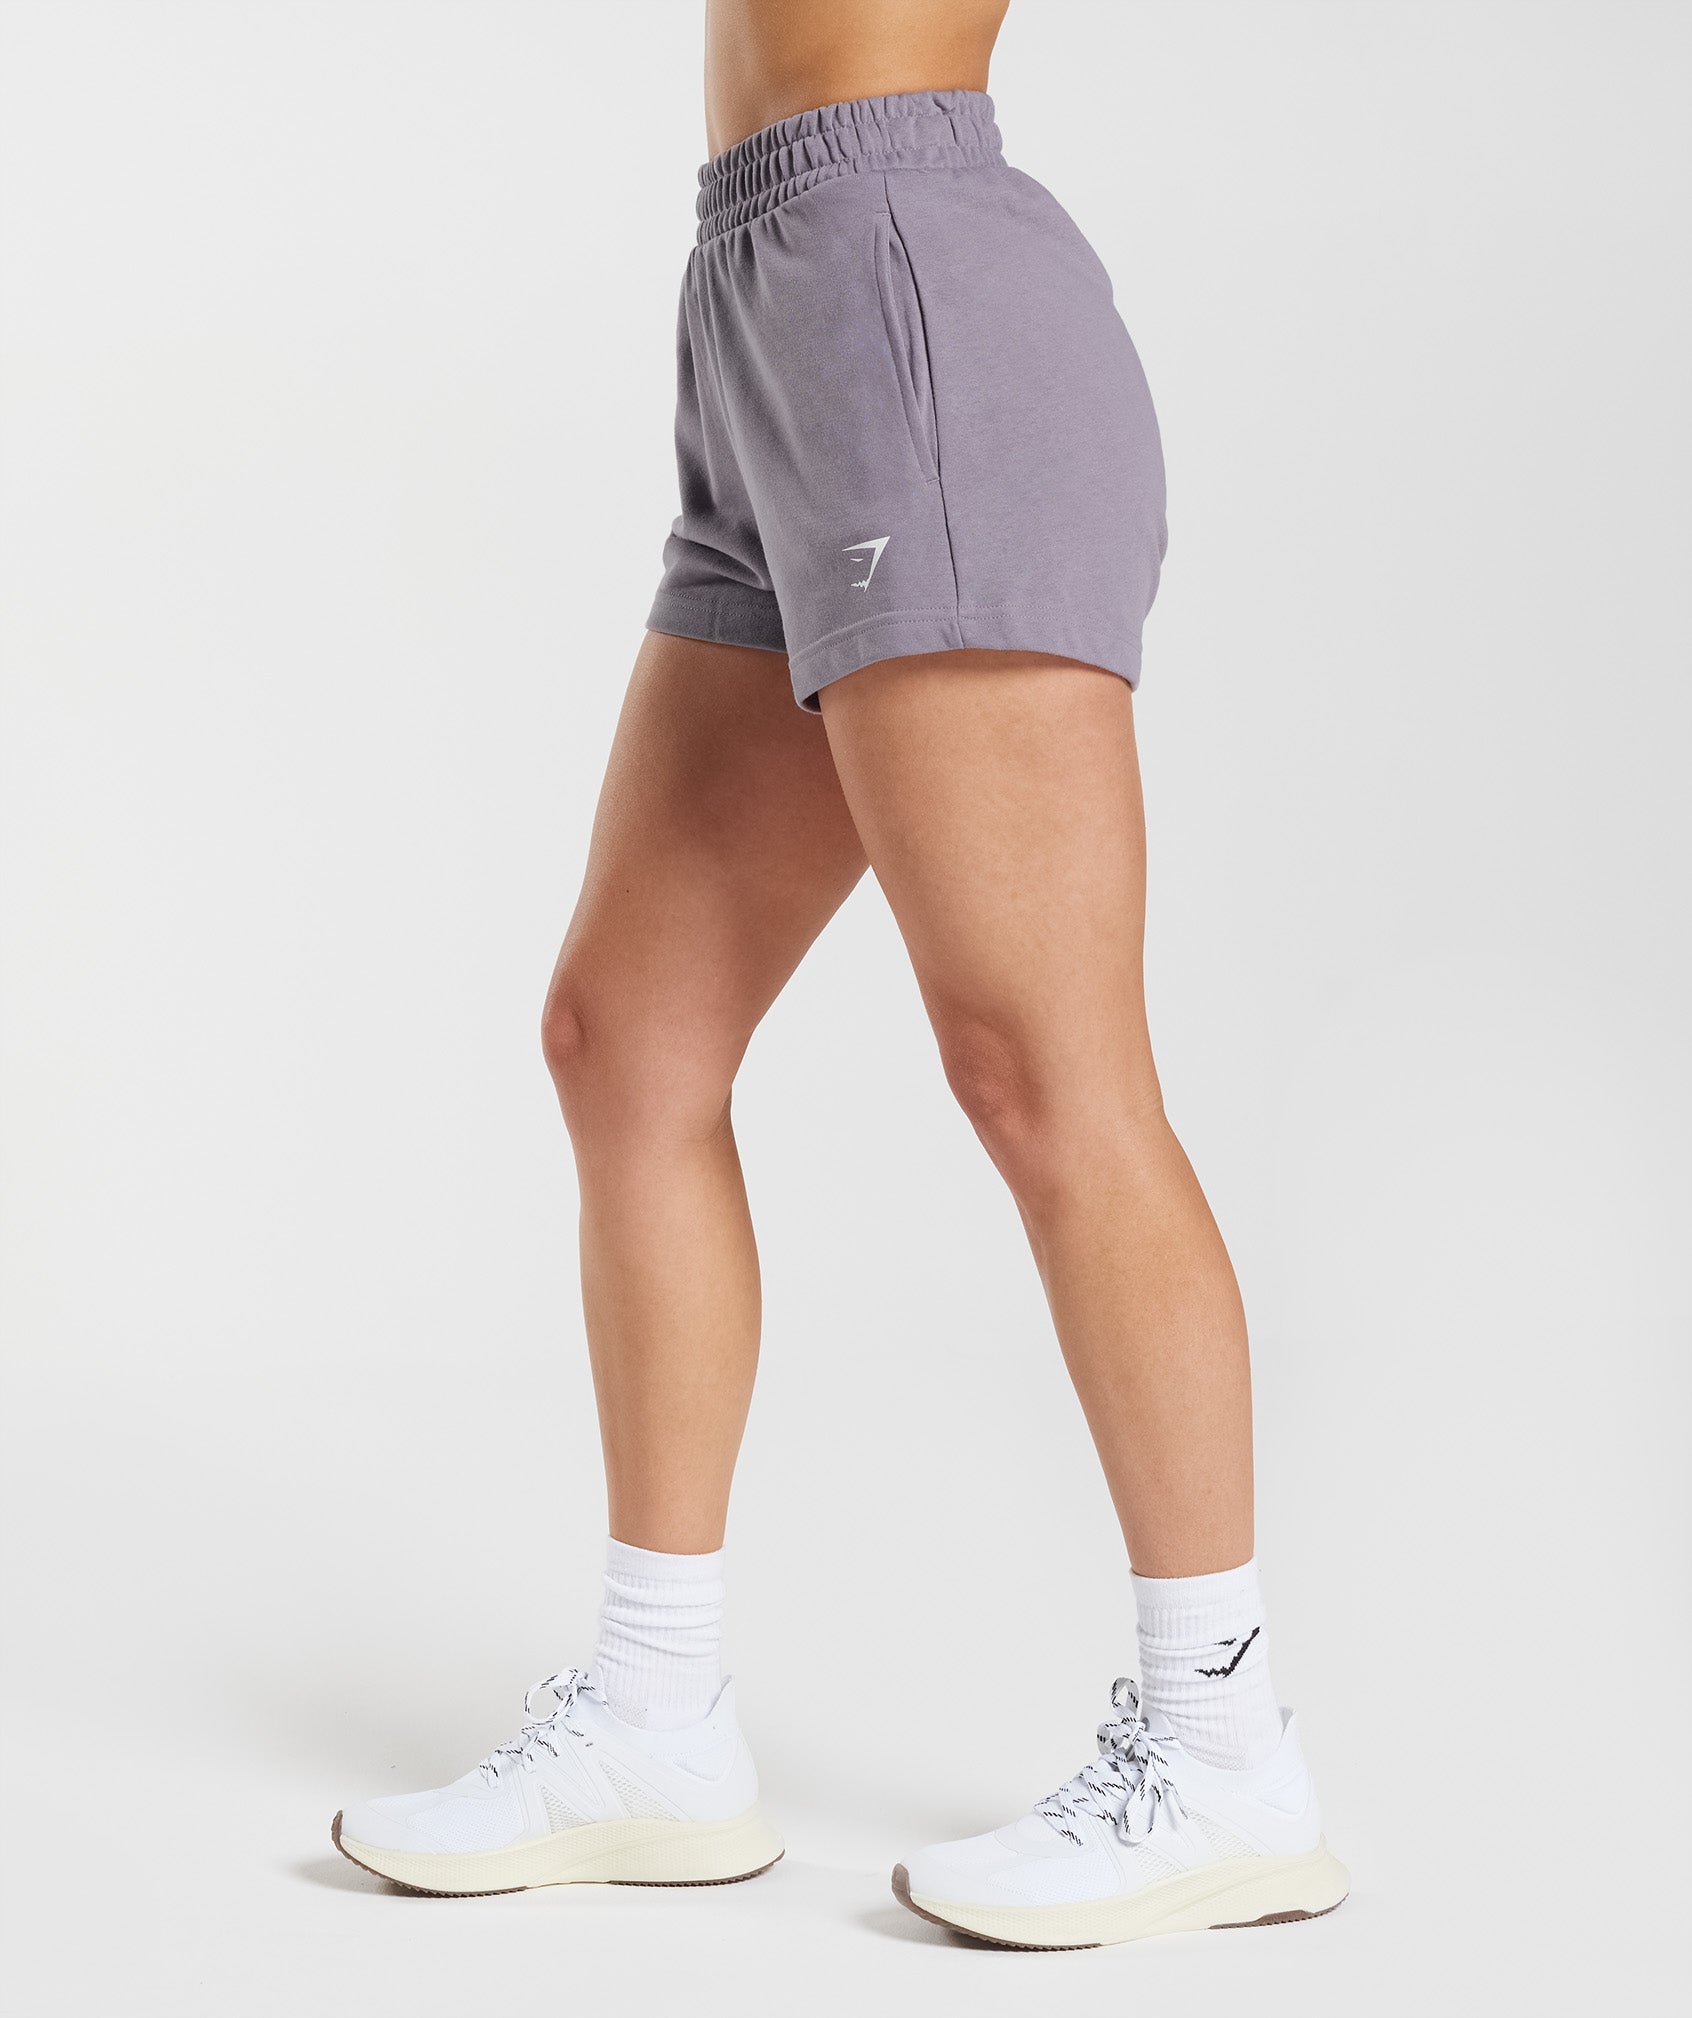 Fraction Sweat Shorts in Slate Lavender - view 3